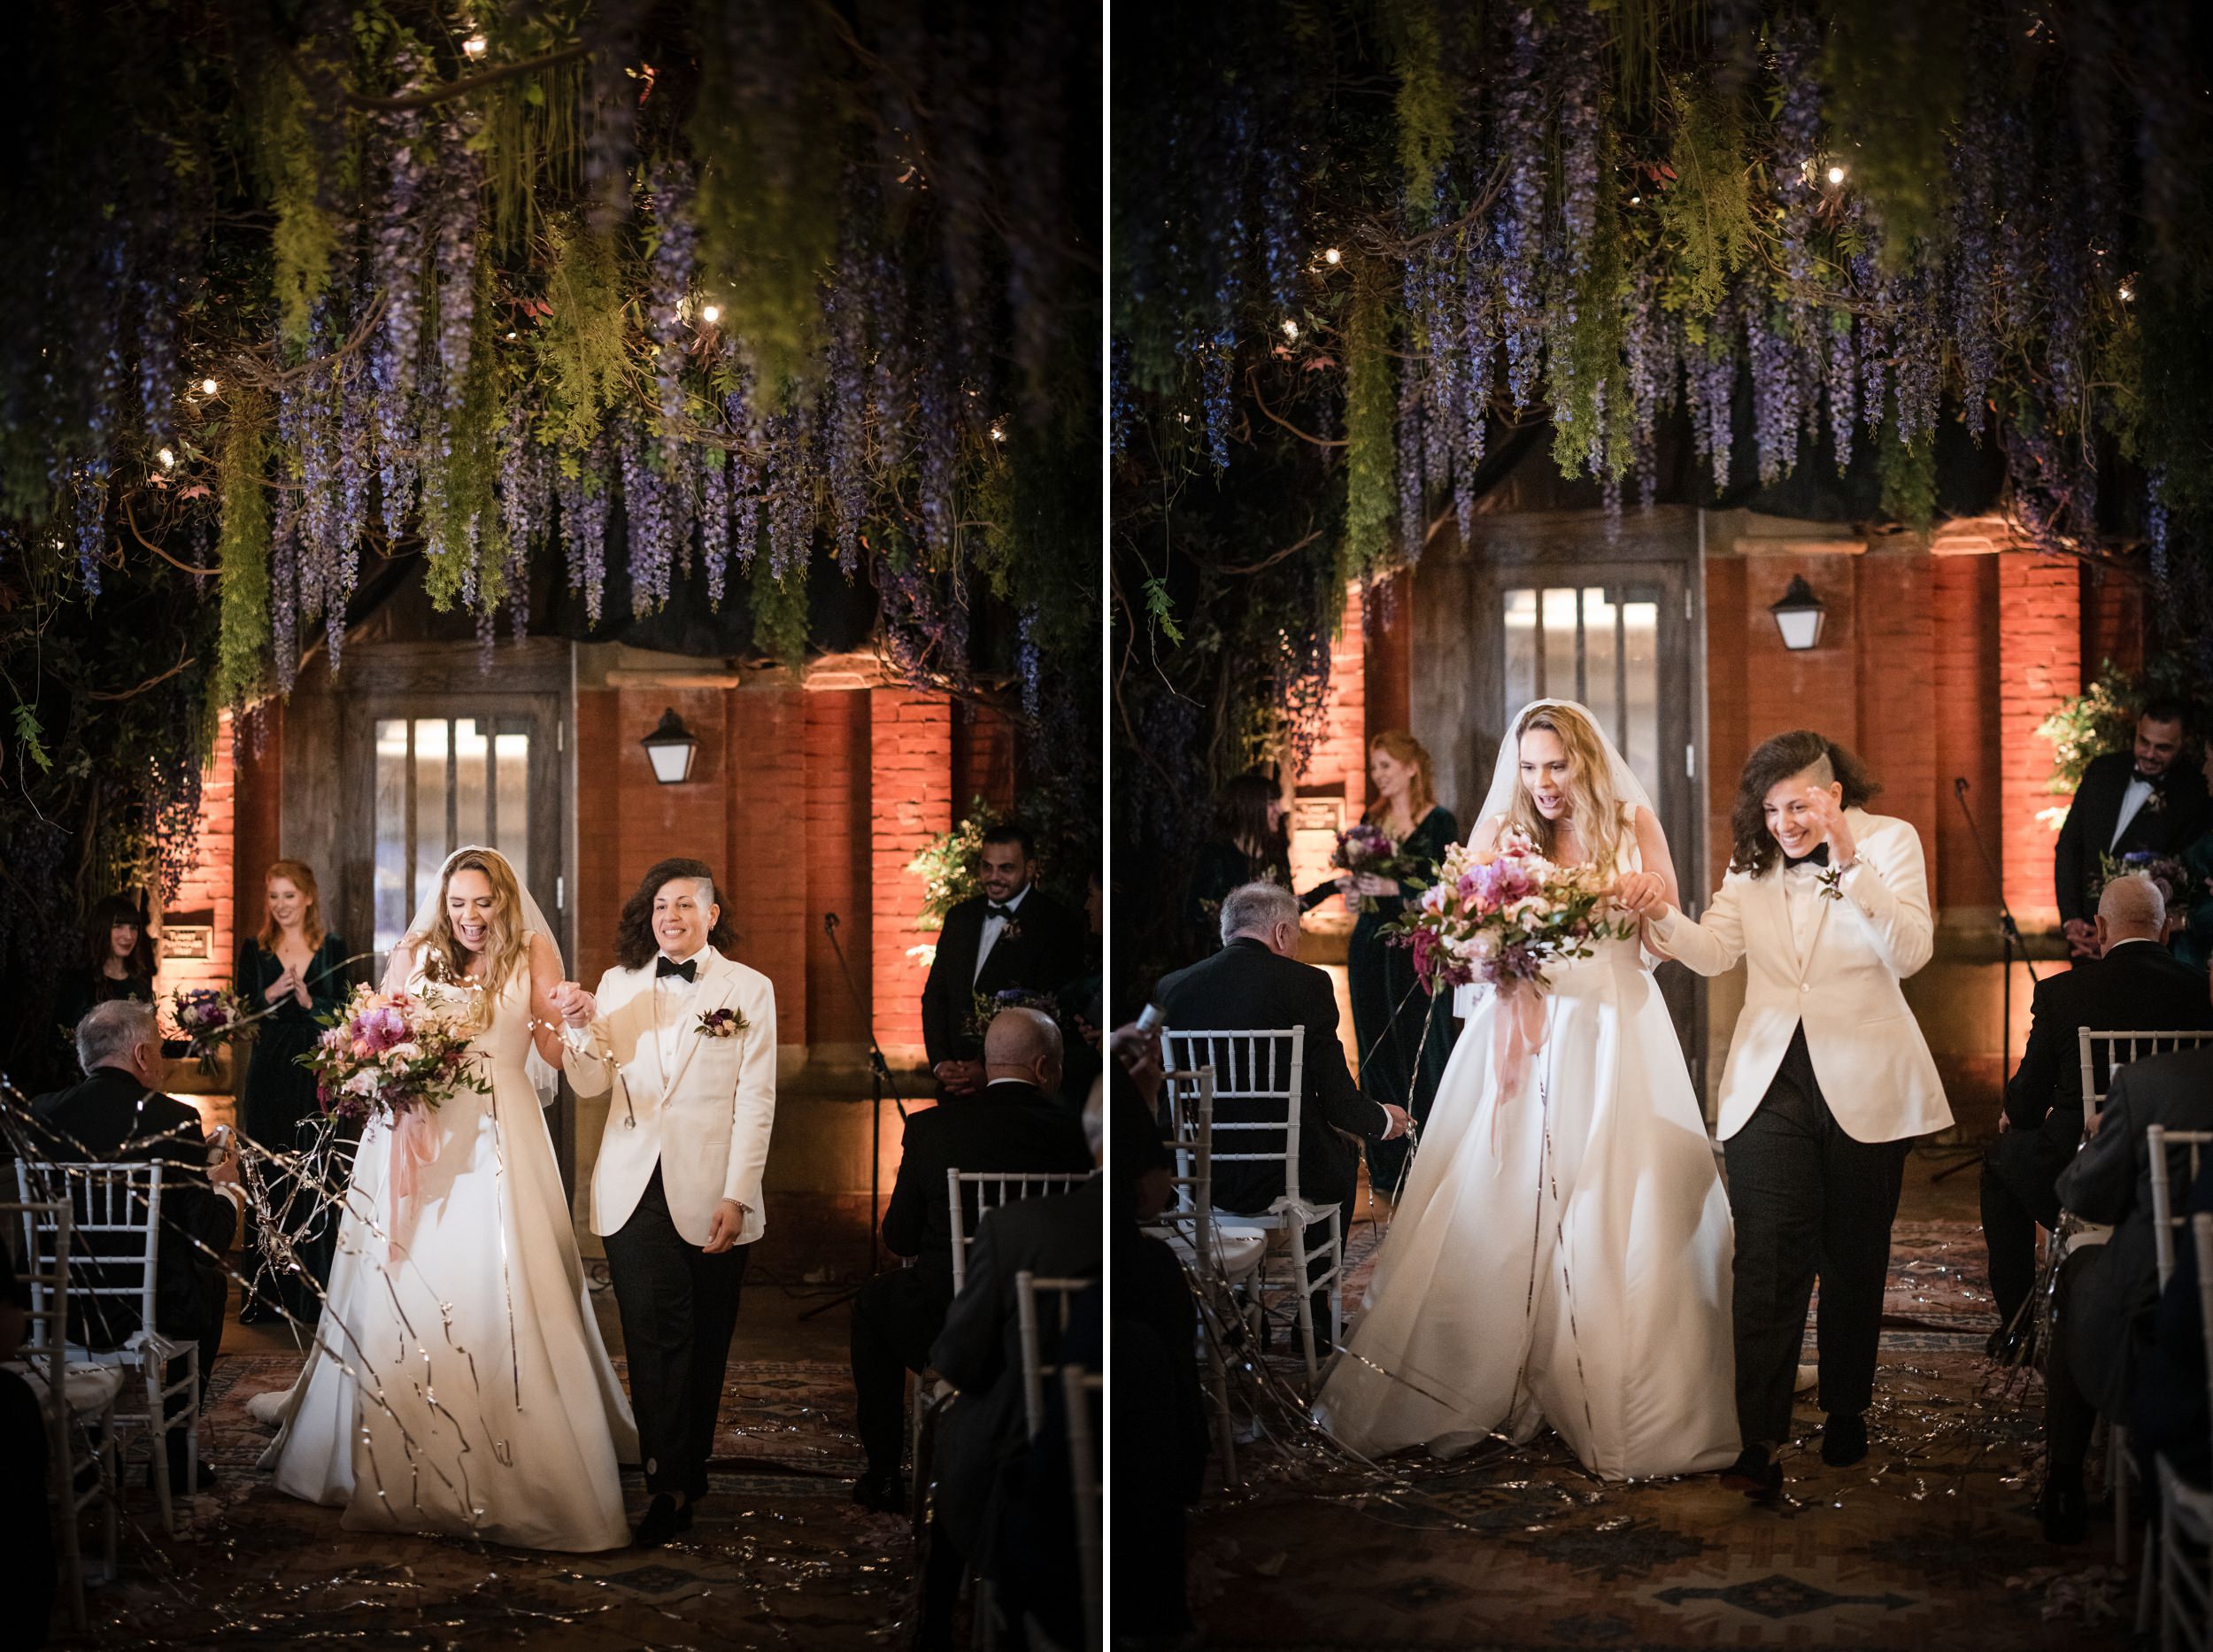 Brides walk down the aisle at a Beekman Hotel wedding in NYC